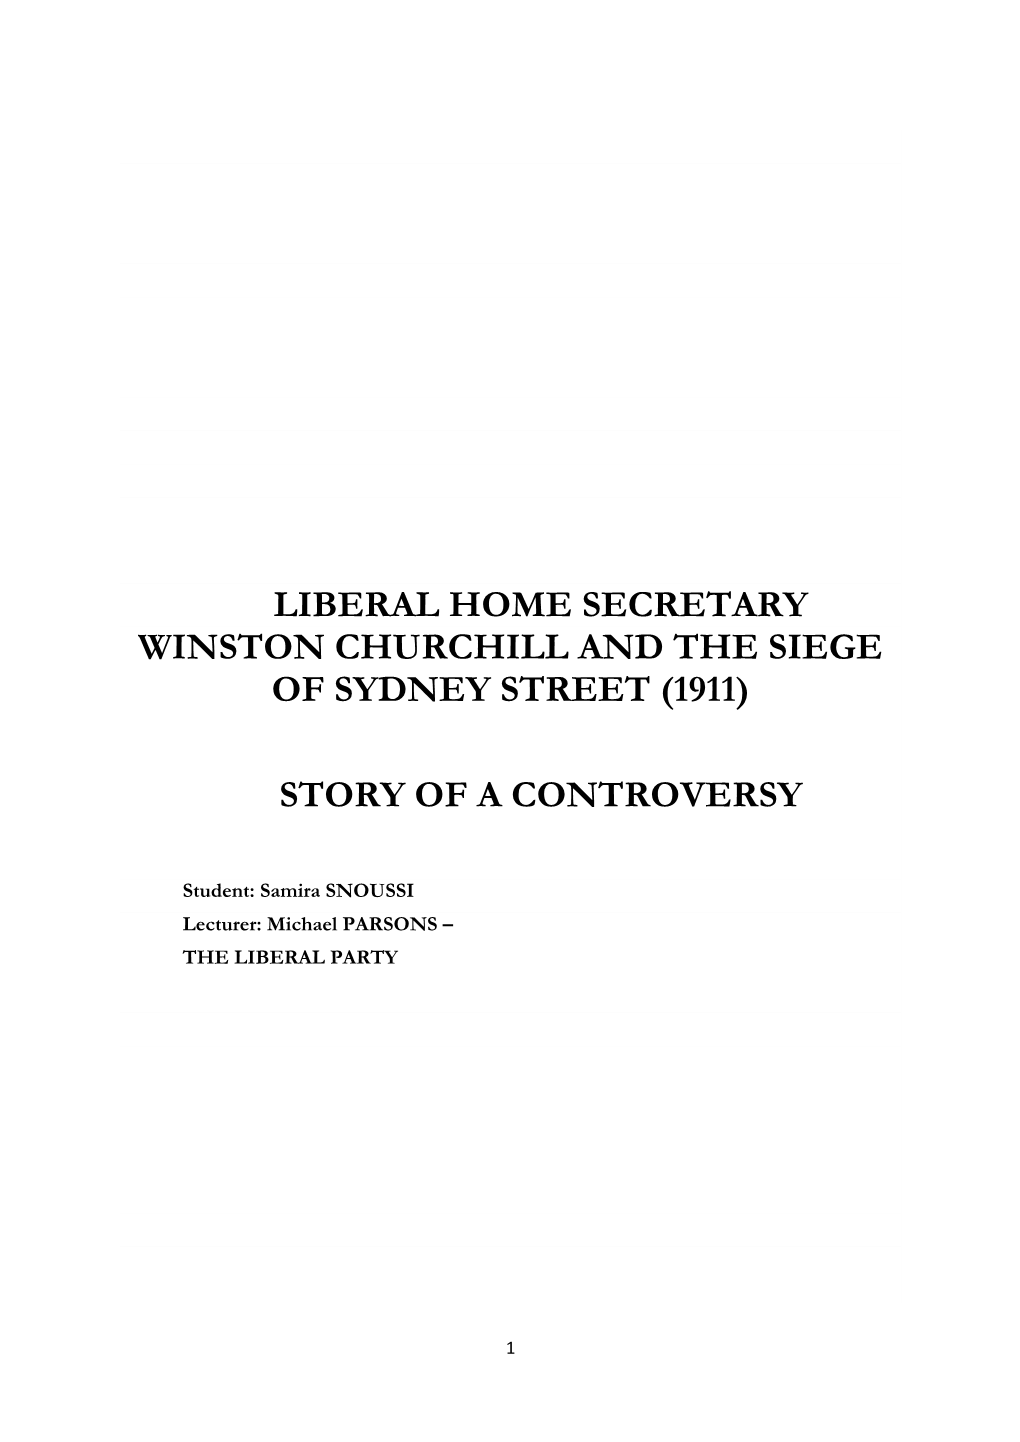 Liberal Home Secretary Winston Churchill and the Siege of Sydney Street (1911)